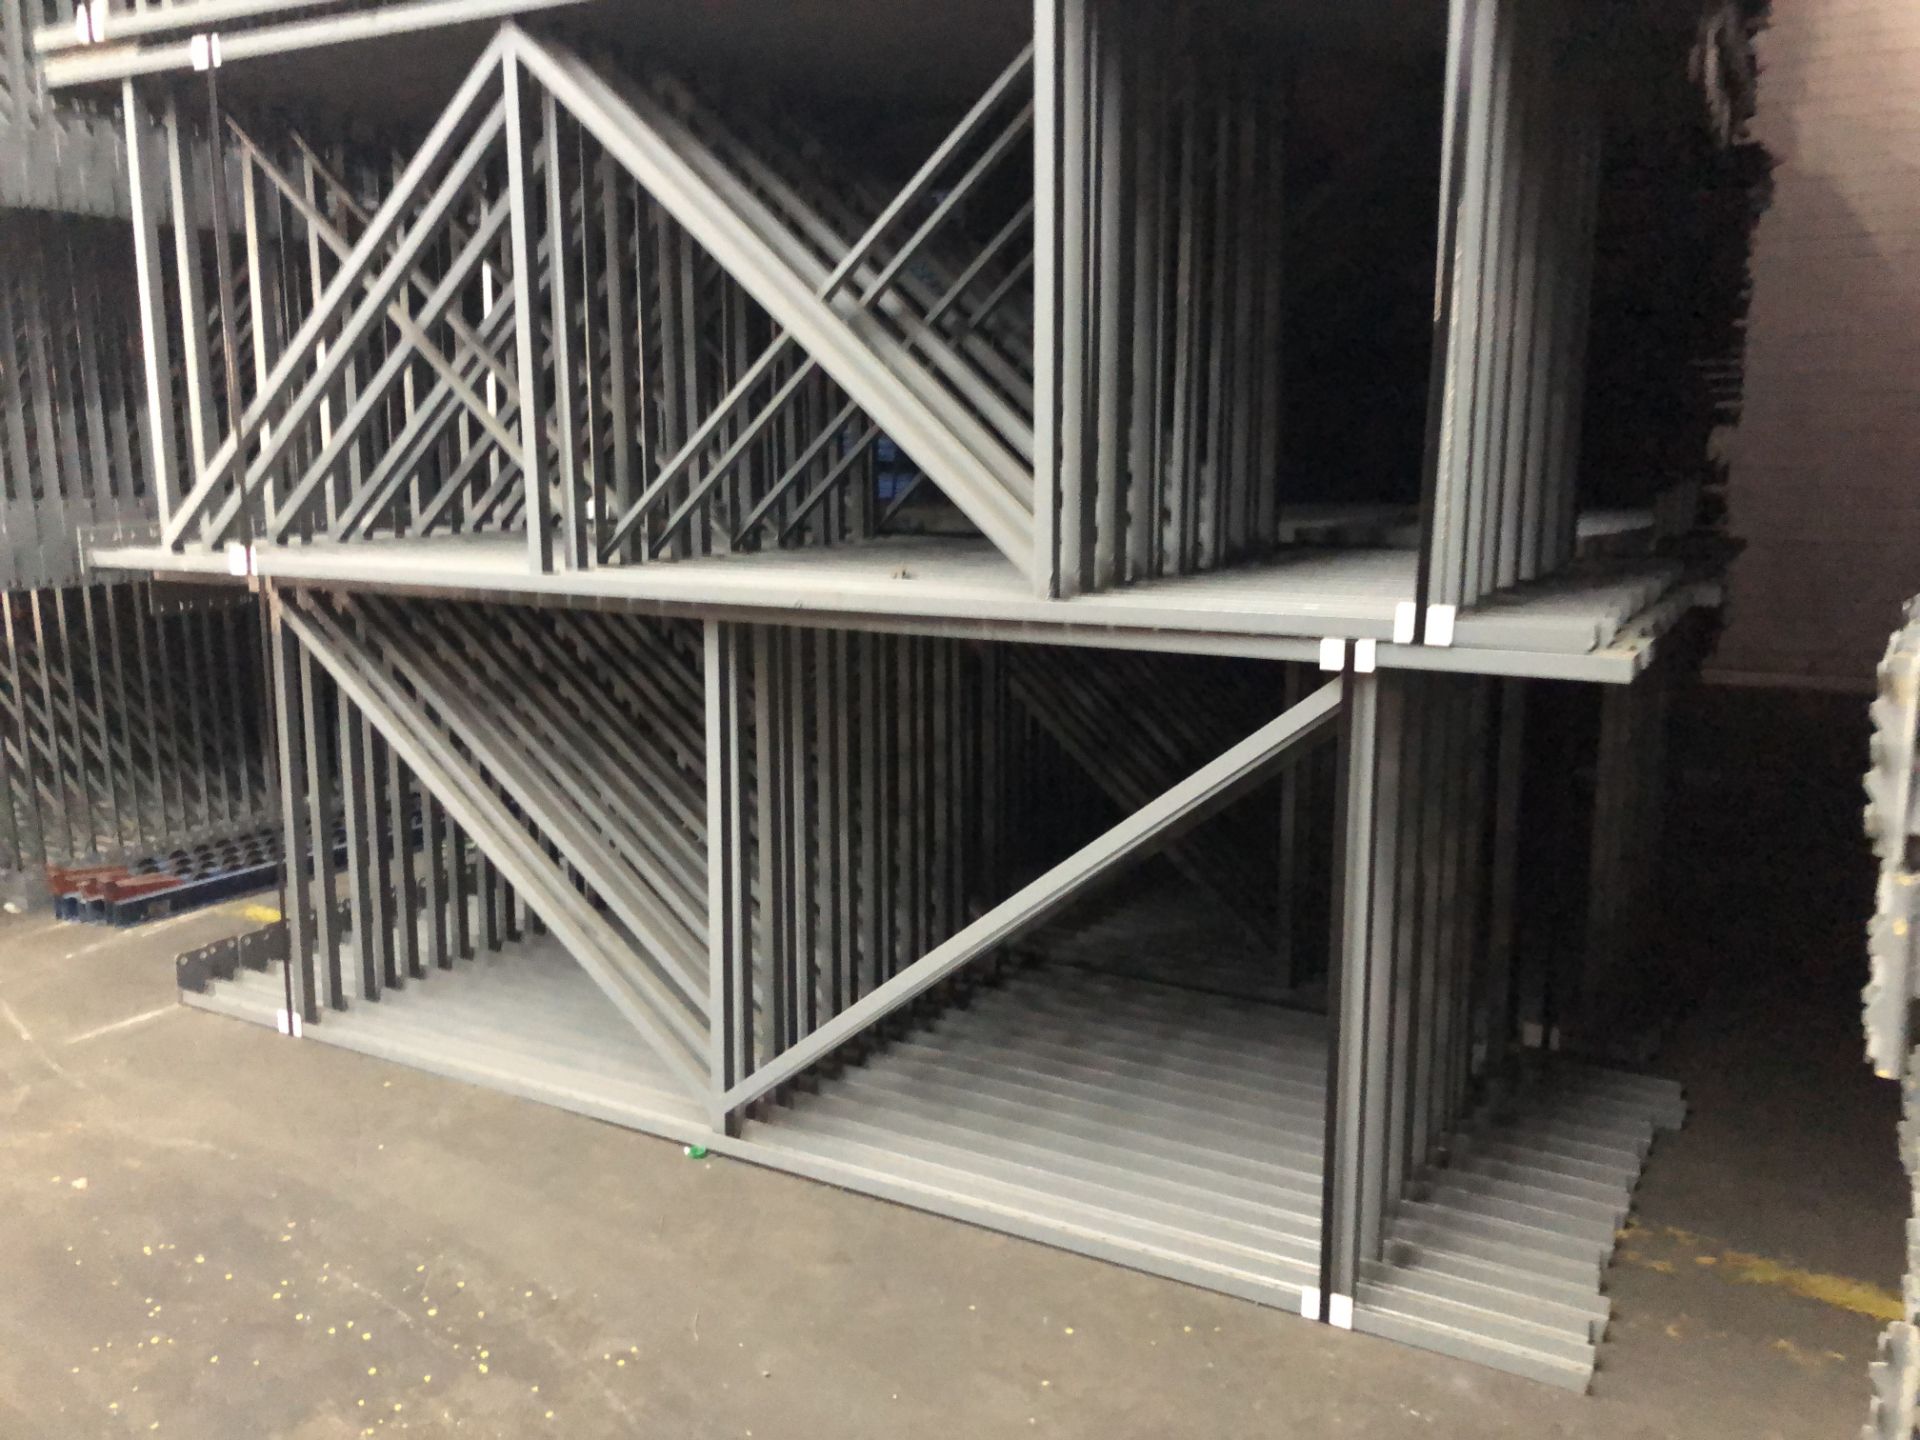 14 BAYS OF 10.5'H X 42"D X 102"L STRUCTURAL STYLE PALLET RACKS - Image 3 of 4